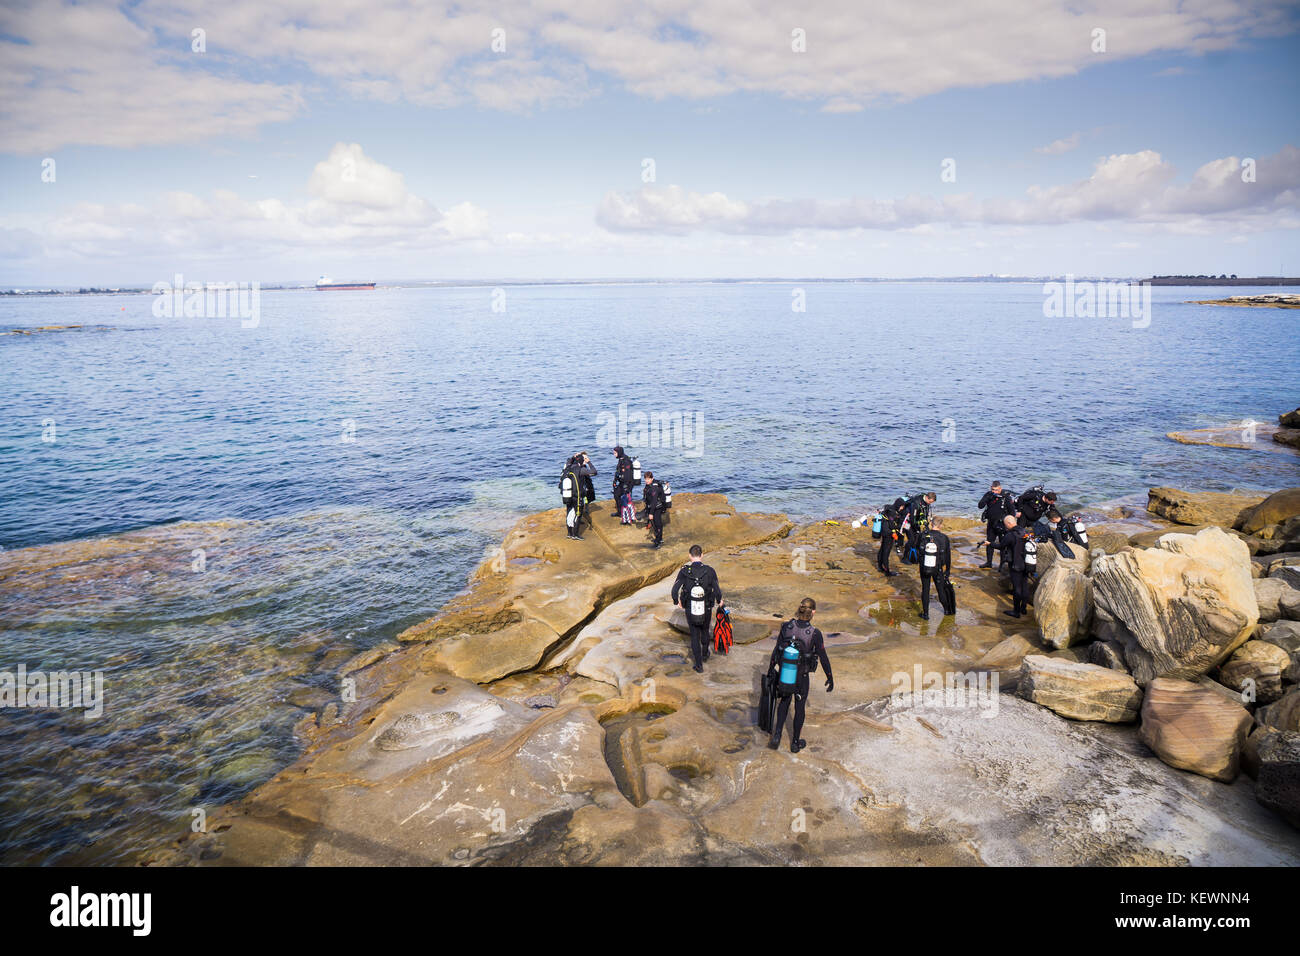 Scuba divers getting ready to dive Stock Photo